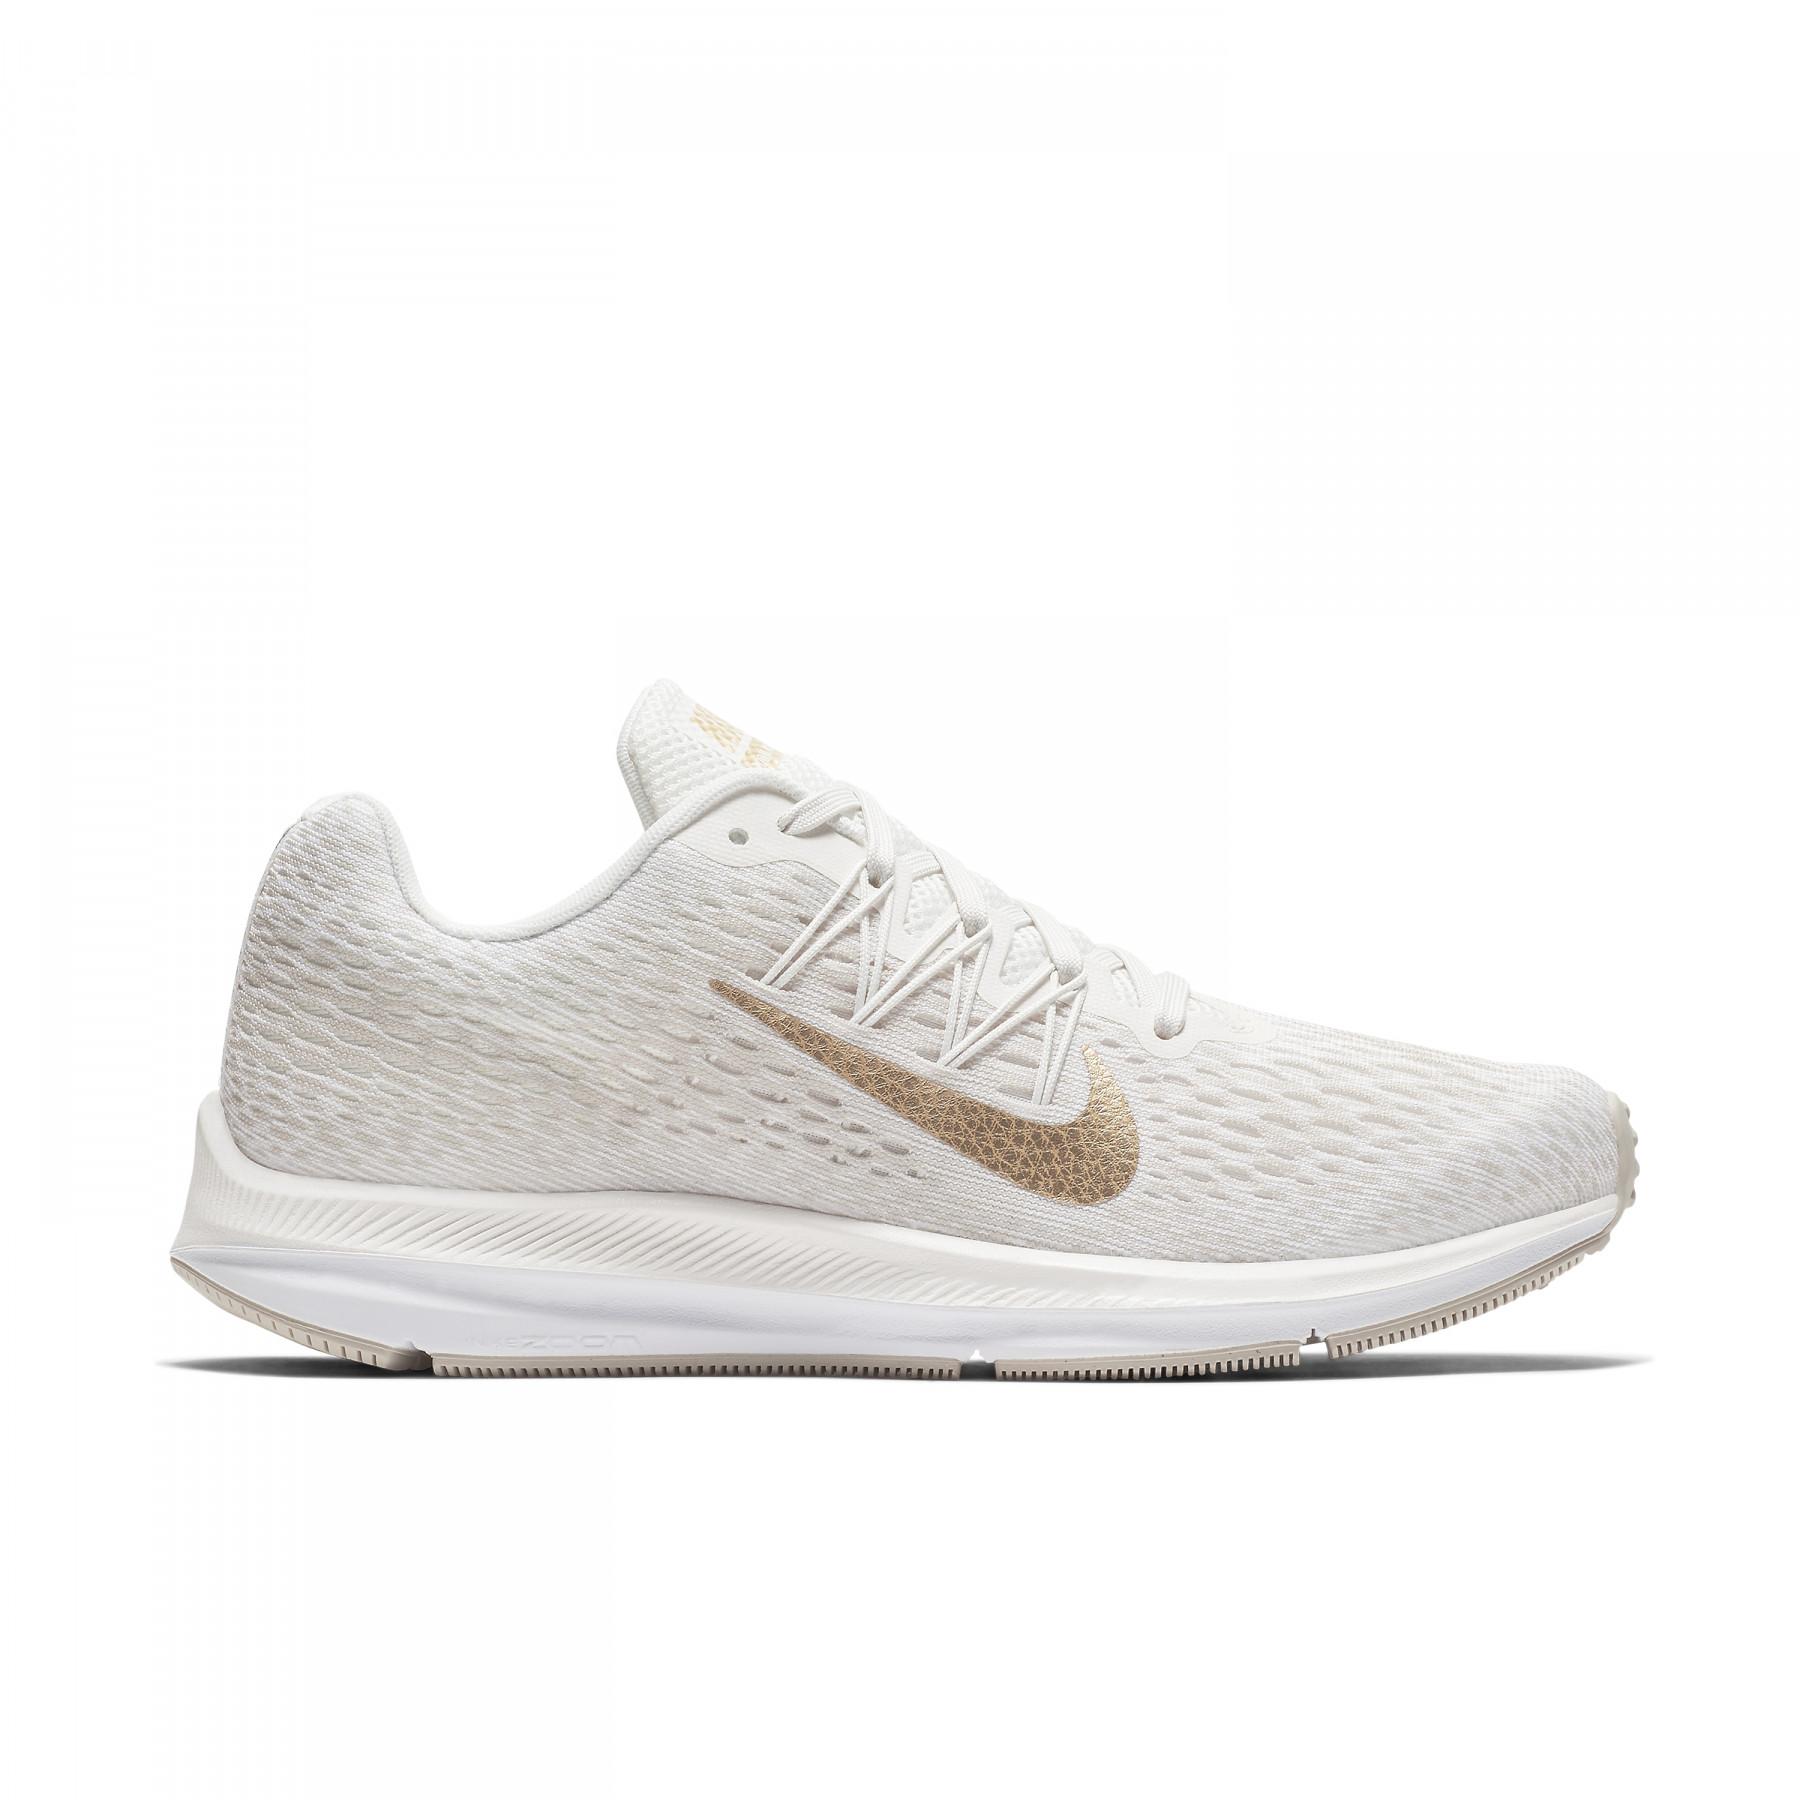 Chaussures femme Nike Air Zoom Winflo 5